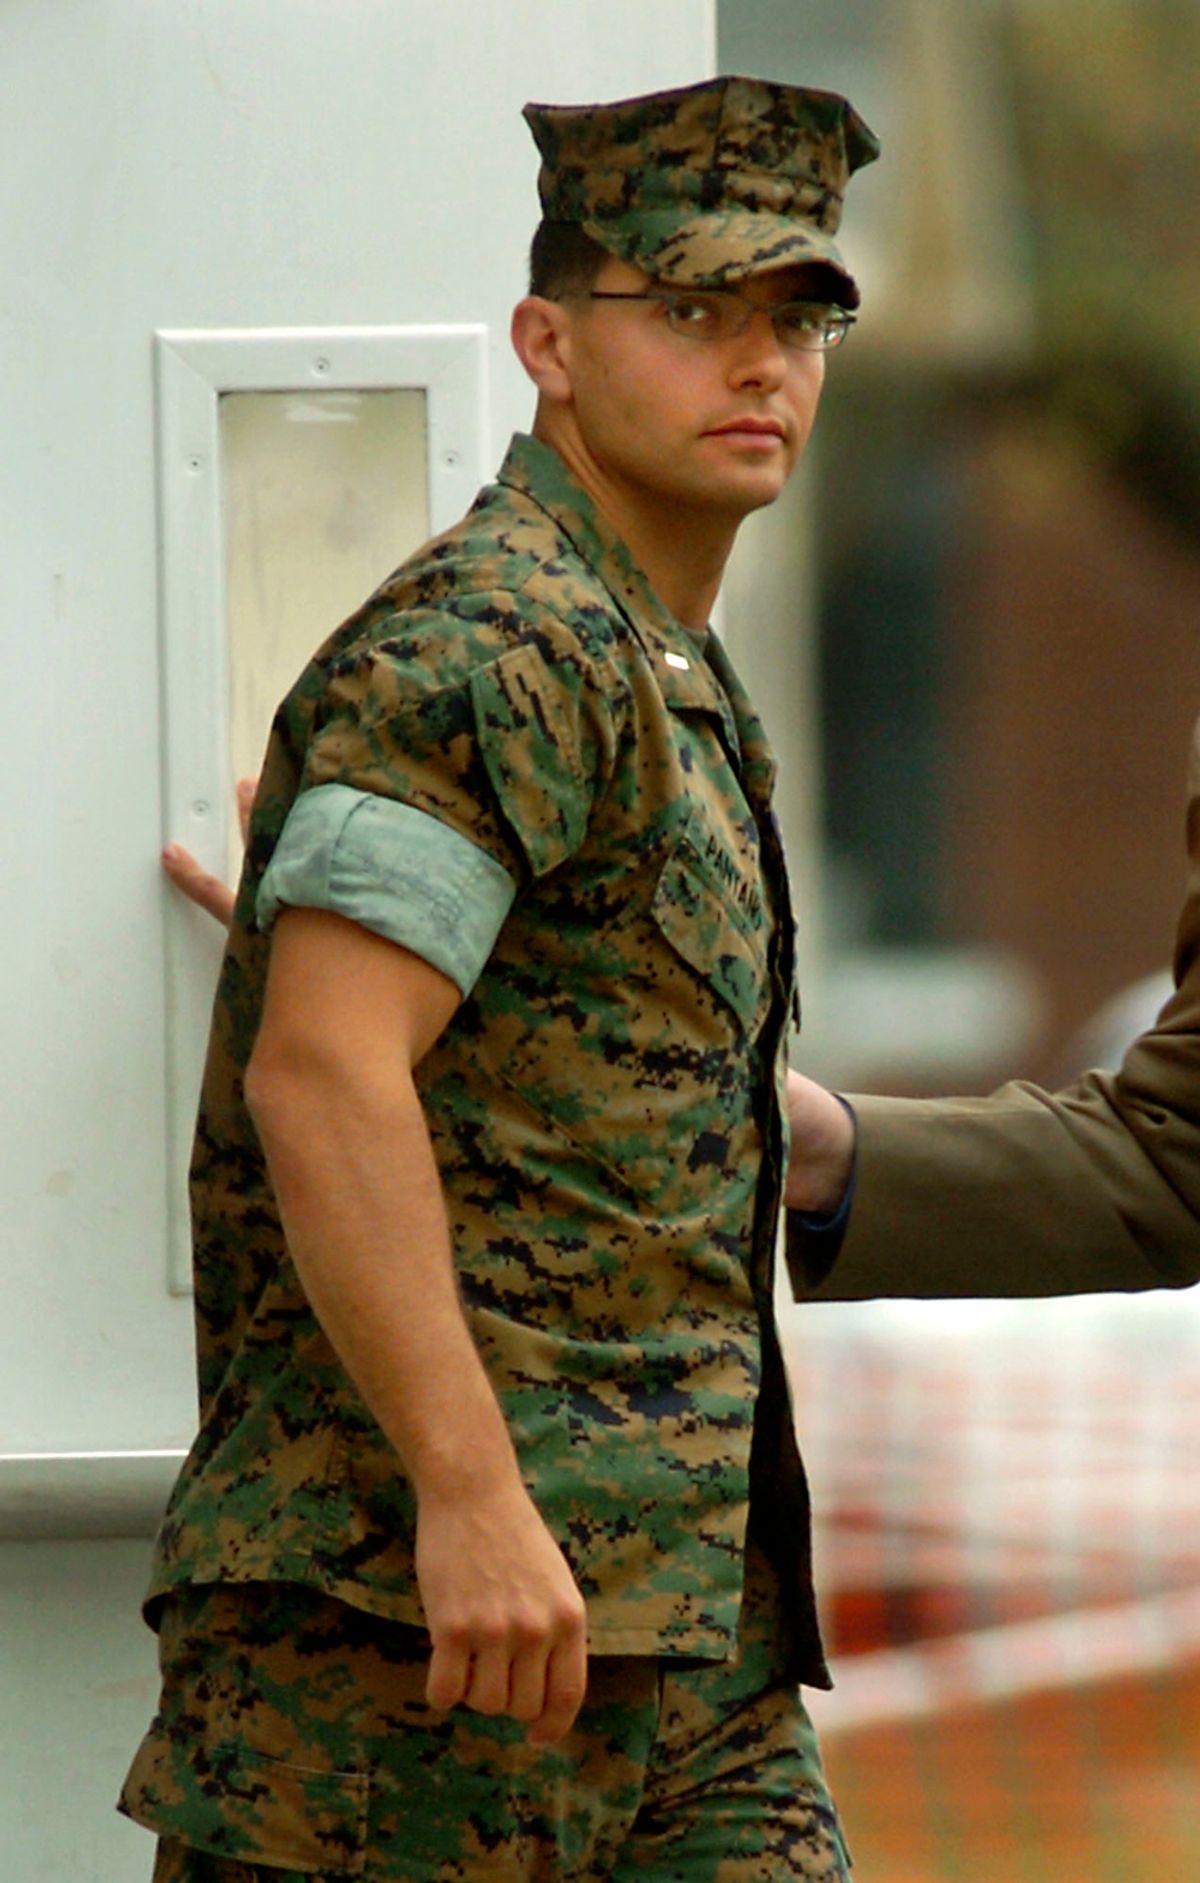 U.S. Marine Second Lt. Ilario Pantano exits the Legal Support Service Courtroom for a recess during his second day of his Artical 32 hearing Wednesday, April 27, 2005, in Camp Lejeune, N.C. Pantano, 33, is accused of murder for shooting two Iraqis in the back during a search for a terrorist hideout last year. (AP photo/Sara D. Davis) (Sara D.  Davis)